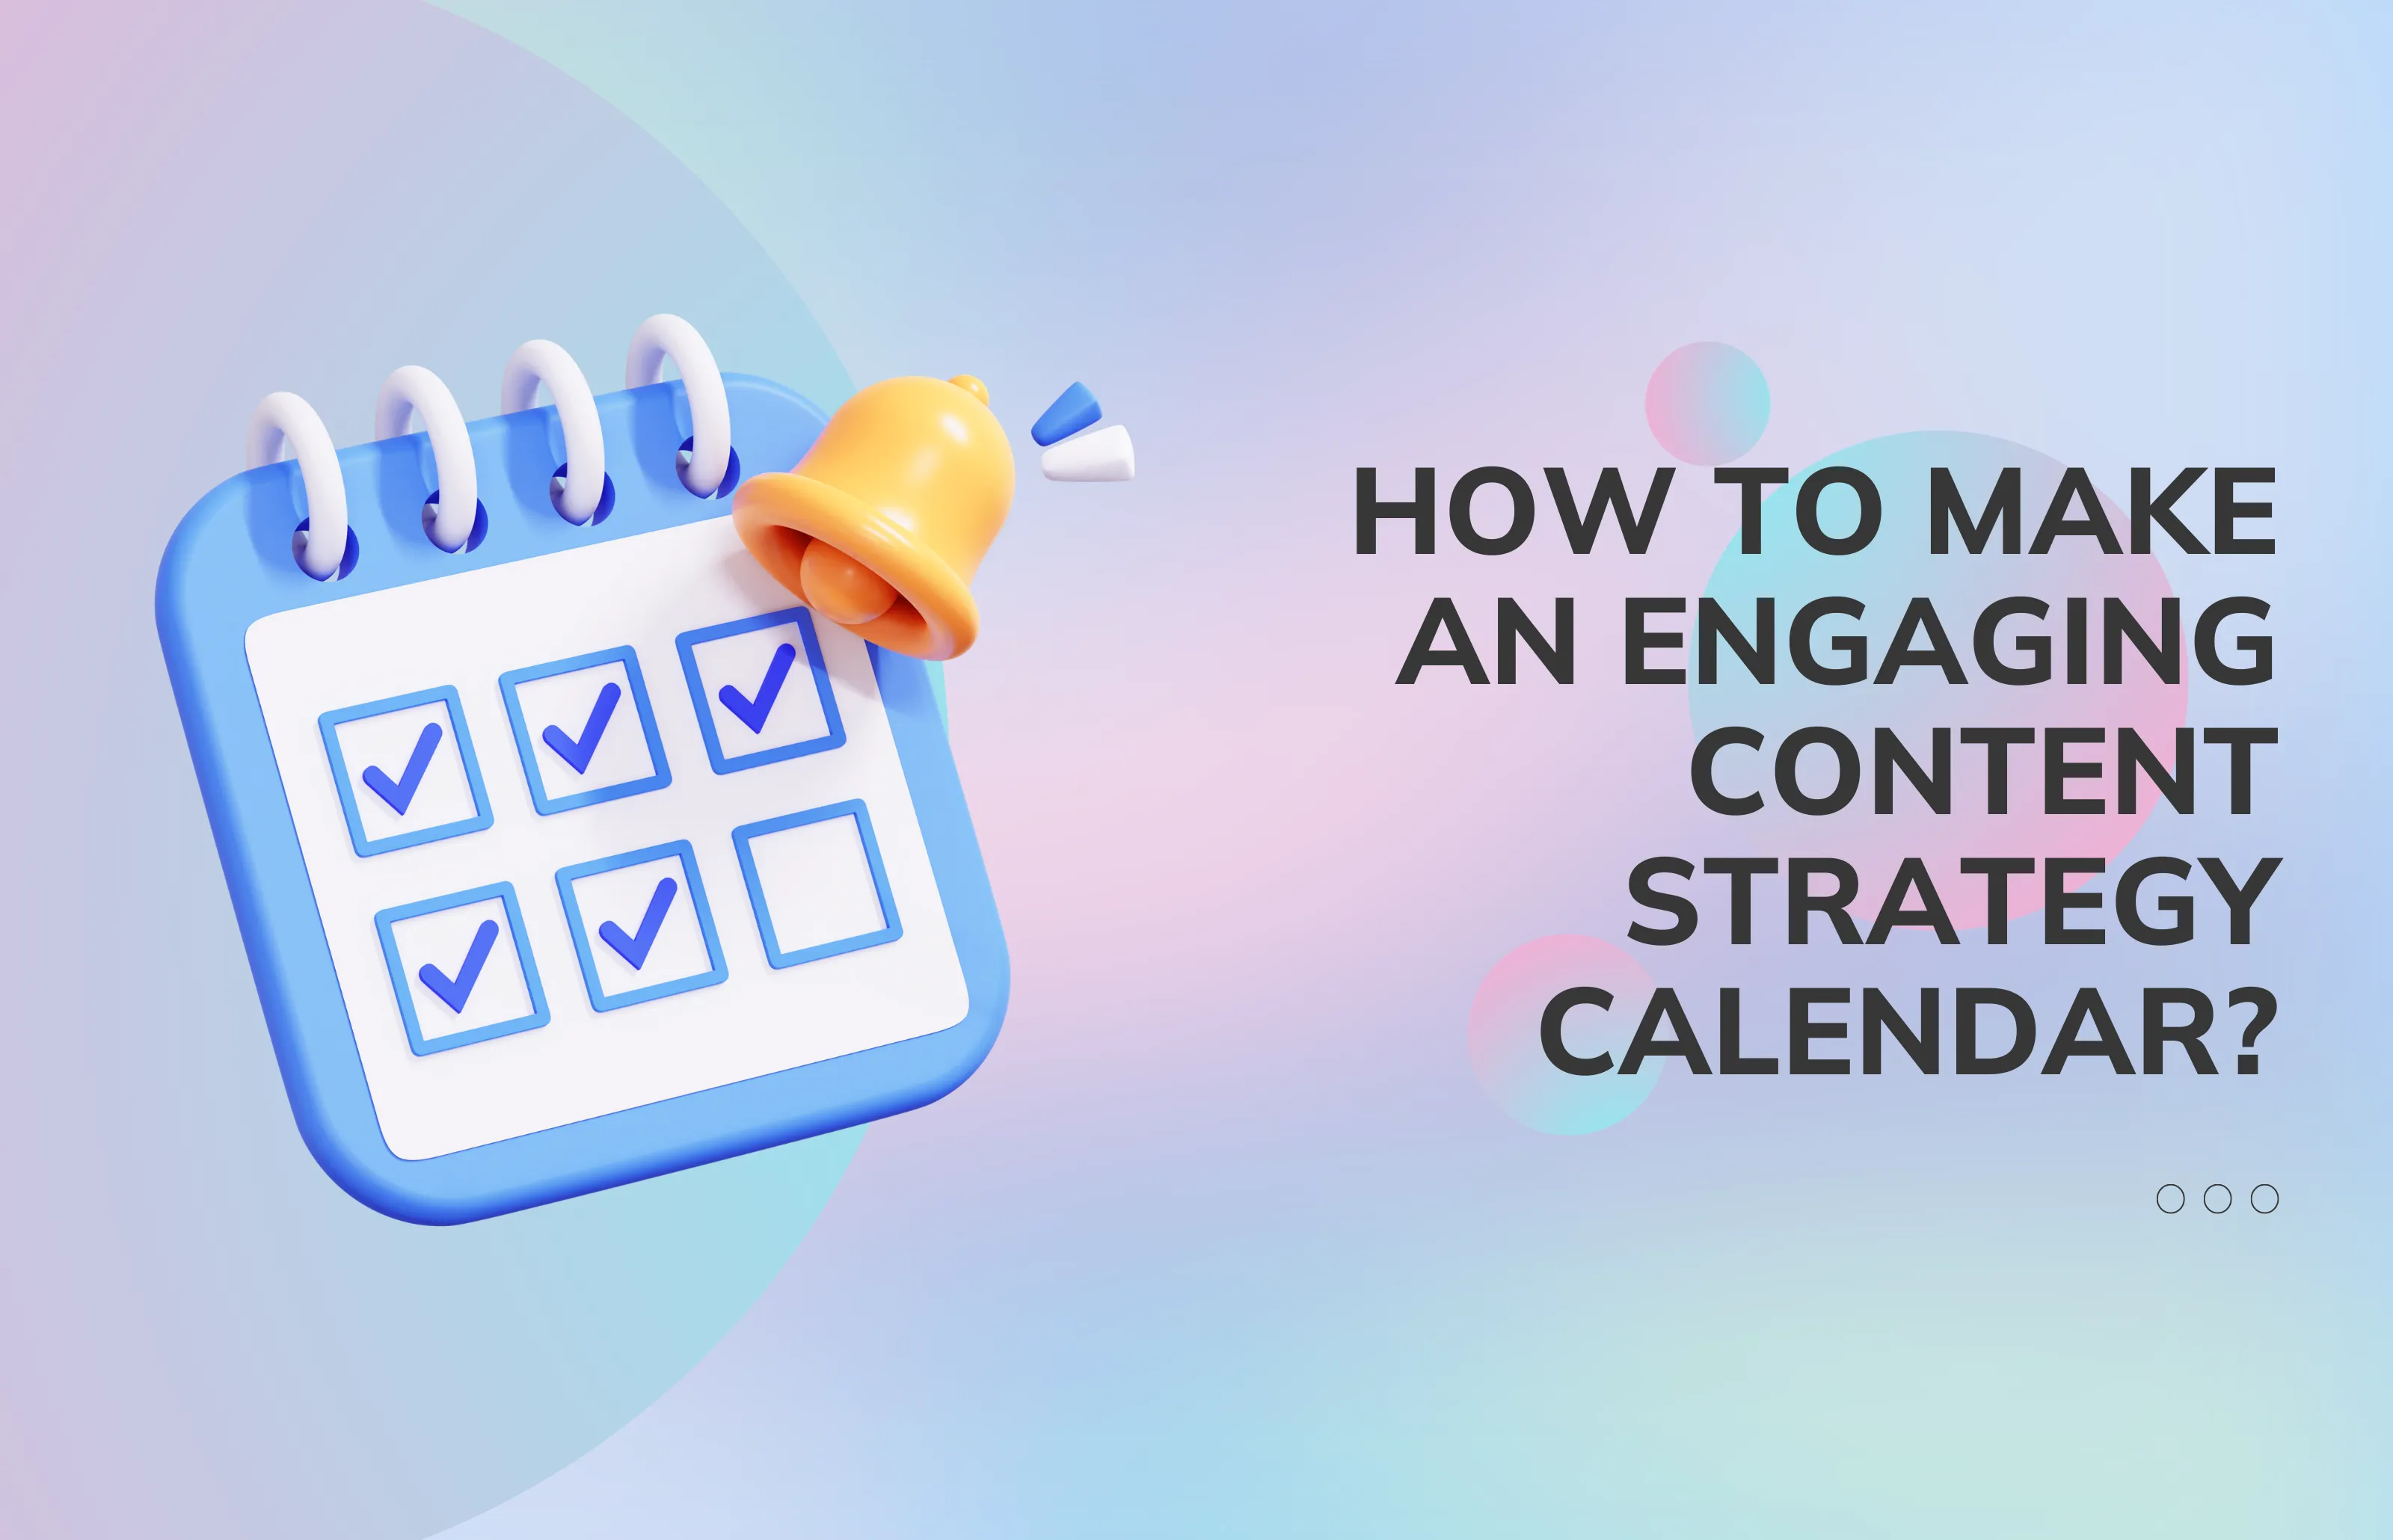 How To Make an Engaging Content Strategy Calendar?